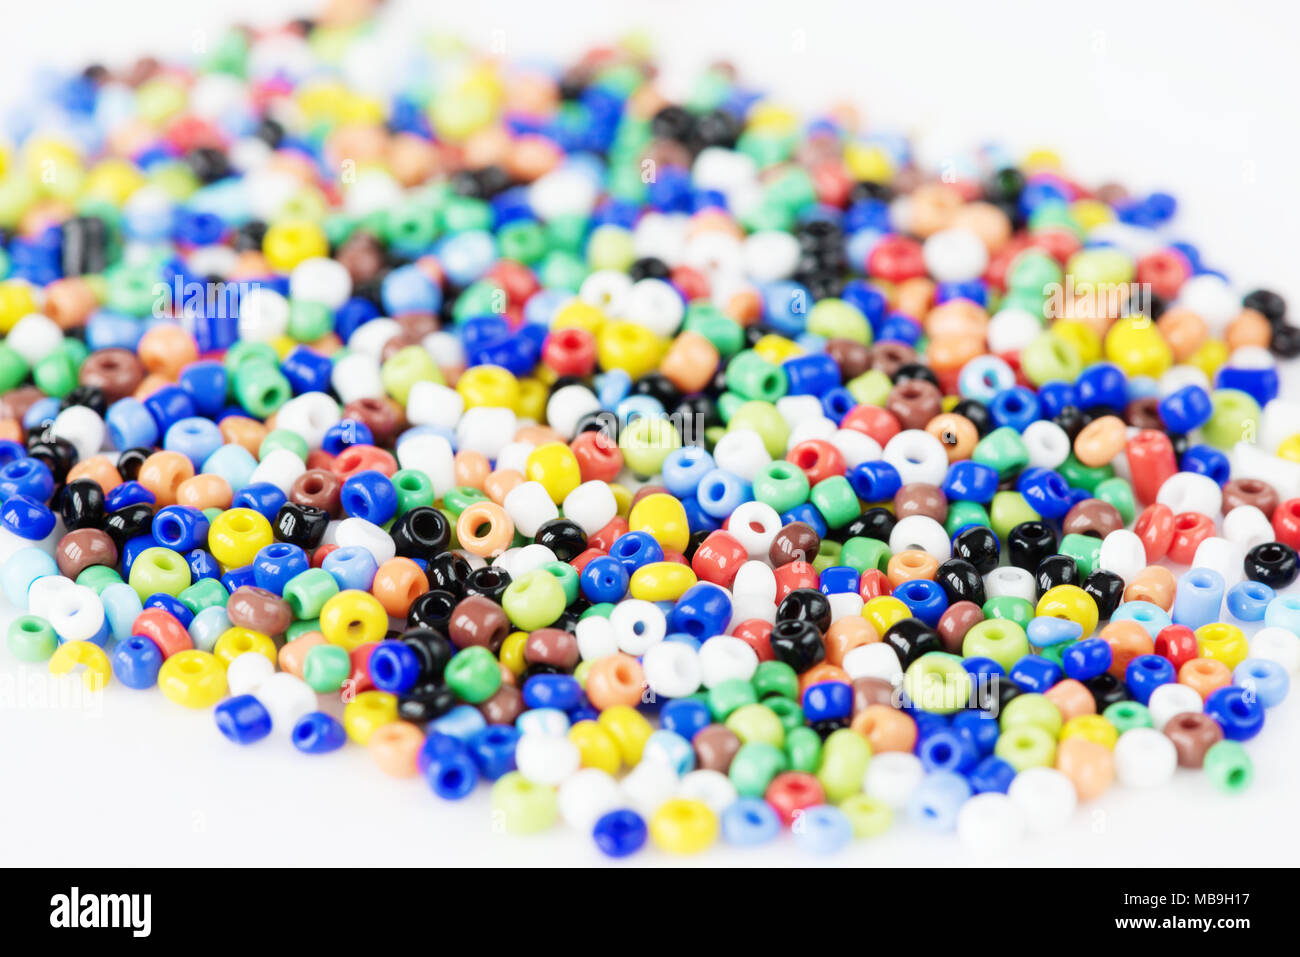 Beads Background. Retro Top View Colorful Bead Heap. Stock Photo, Picture  and Royalty Free Image. Image 73577763.